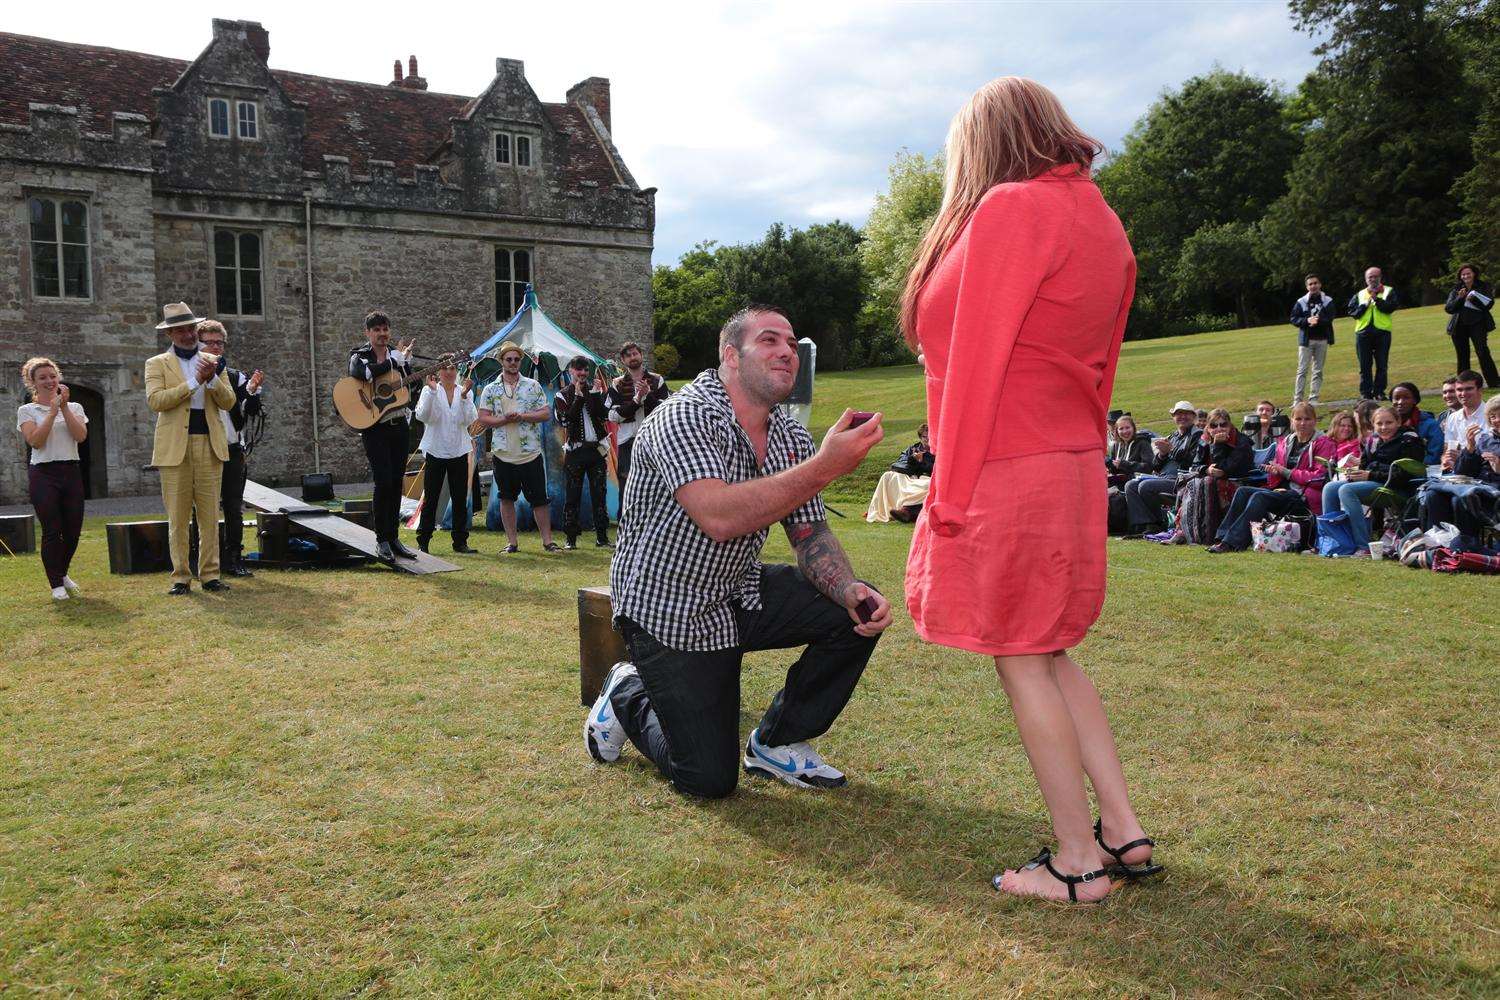 Rob Cooney proposes to Lavinia Evans during the interval of the Changeling Theatre's open air production